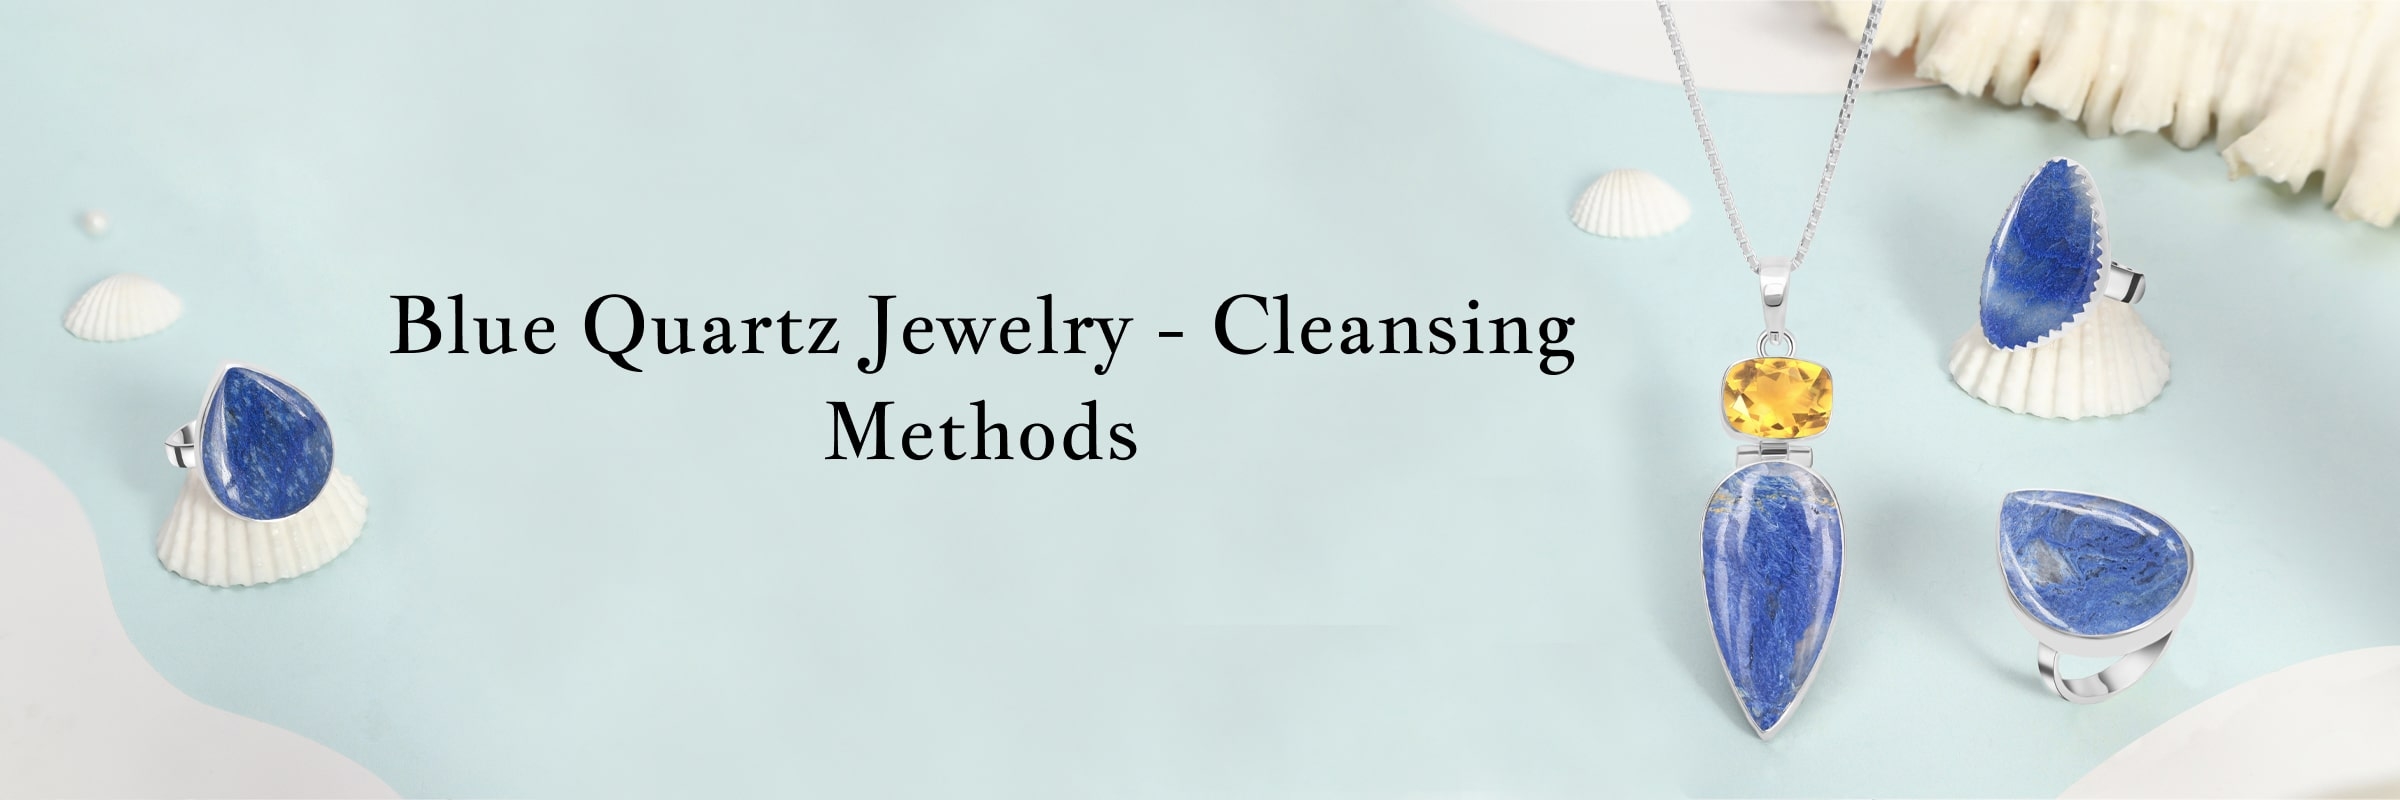 How to Cleanse Your Blue Quartz Jewelry?